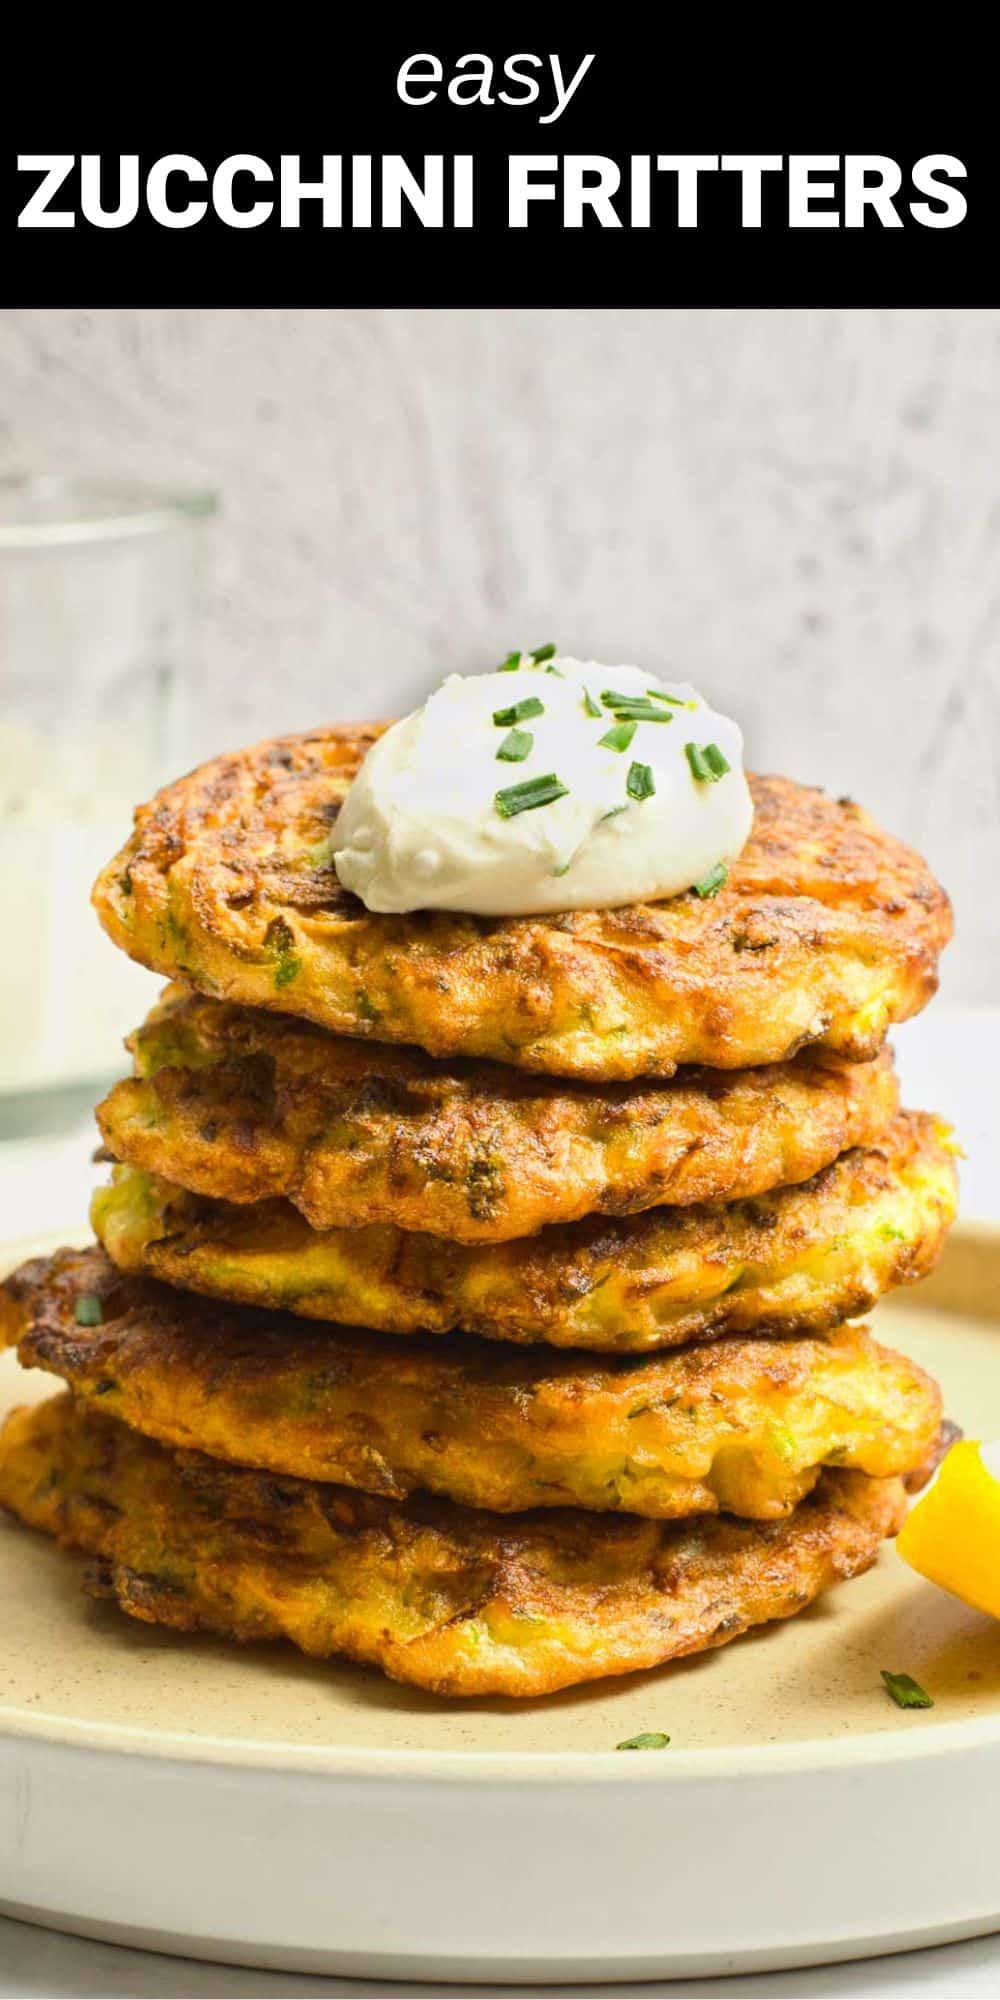 These scrumptious Zucchini Fritters are delightfully crunchy on the outside and deliciously soft and savory on the inside. They're super easy to make and can be enjoyed as a tasty snack, appetizer, or side dish.